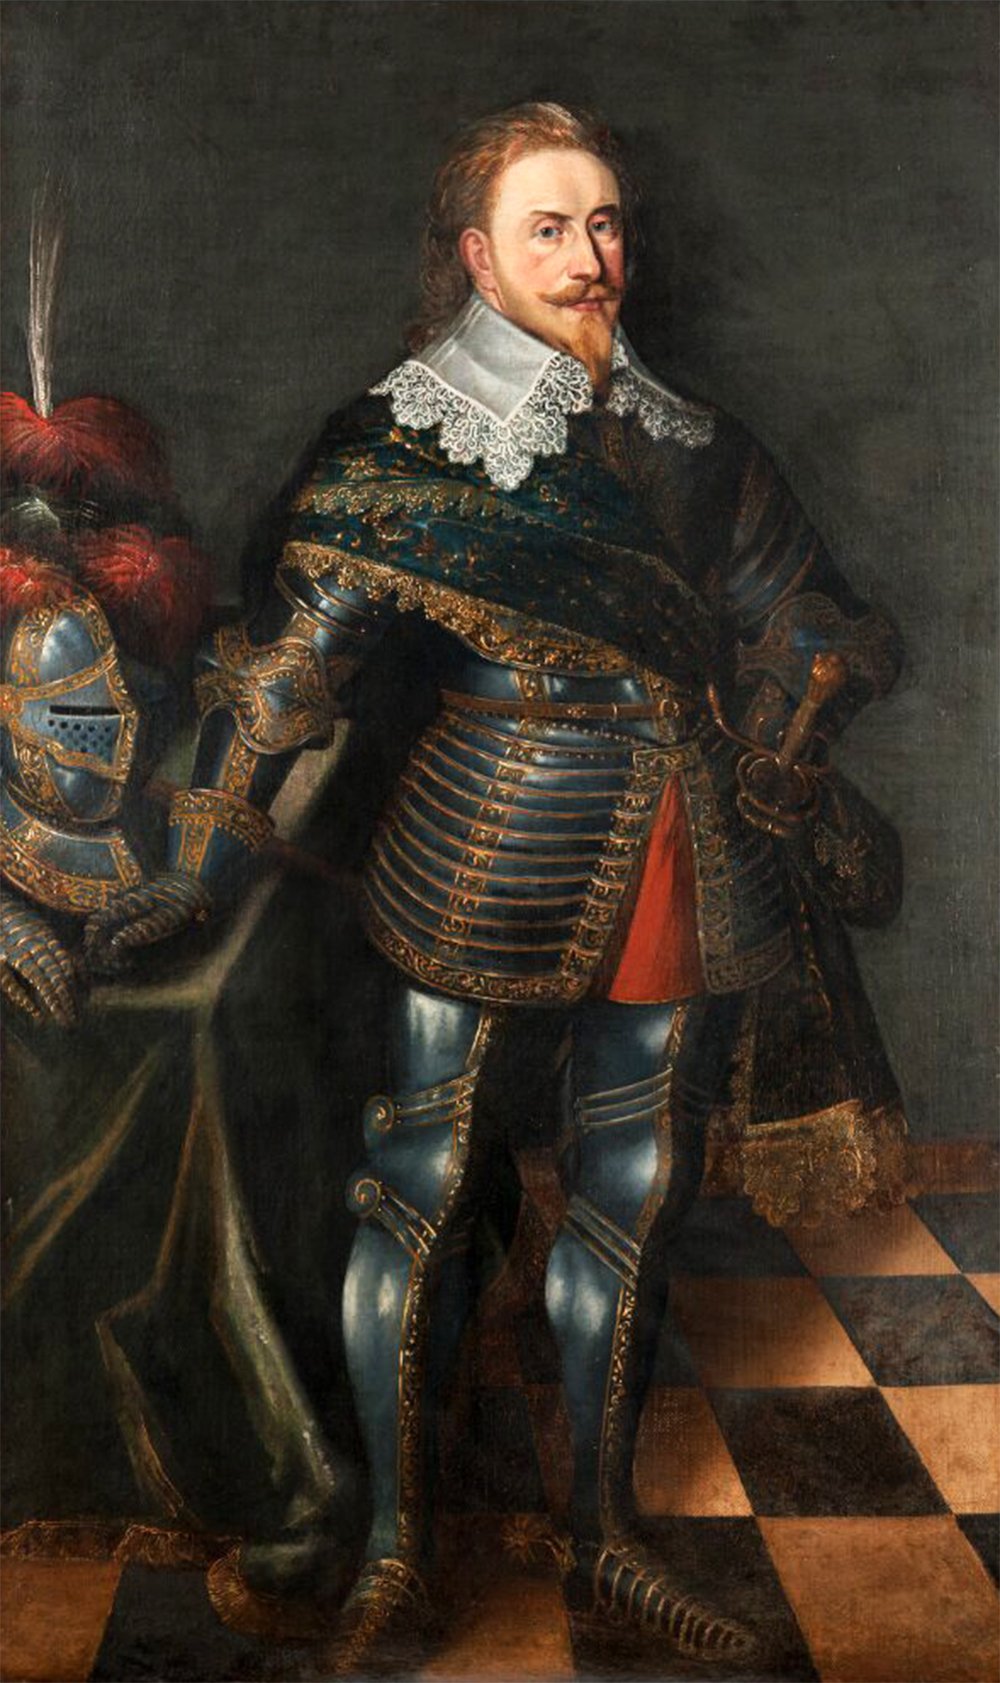 King Gustavus Adolphus of Sweden in a blue and gold suit of armor with a sash and a helmet with a red plume next to him on a table, standing on a checkered floor against a black background.